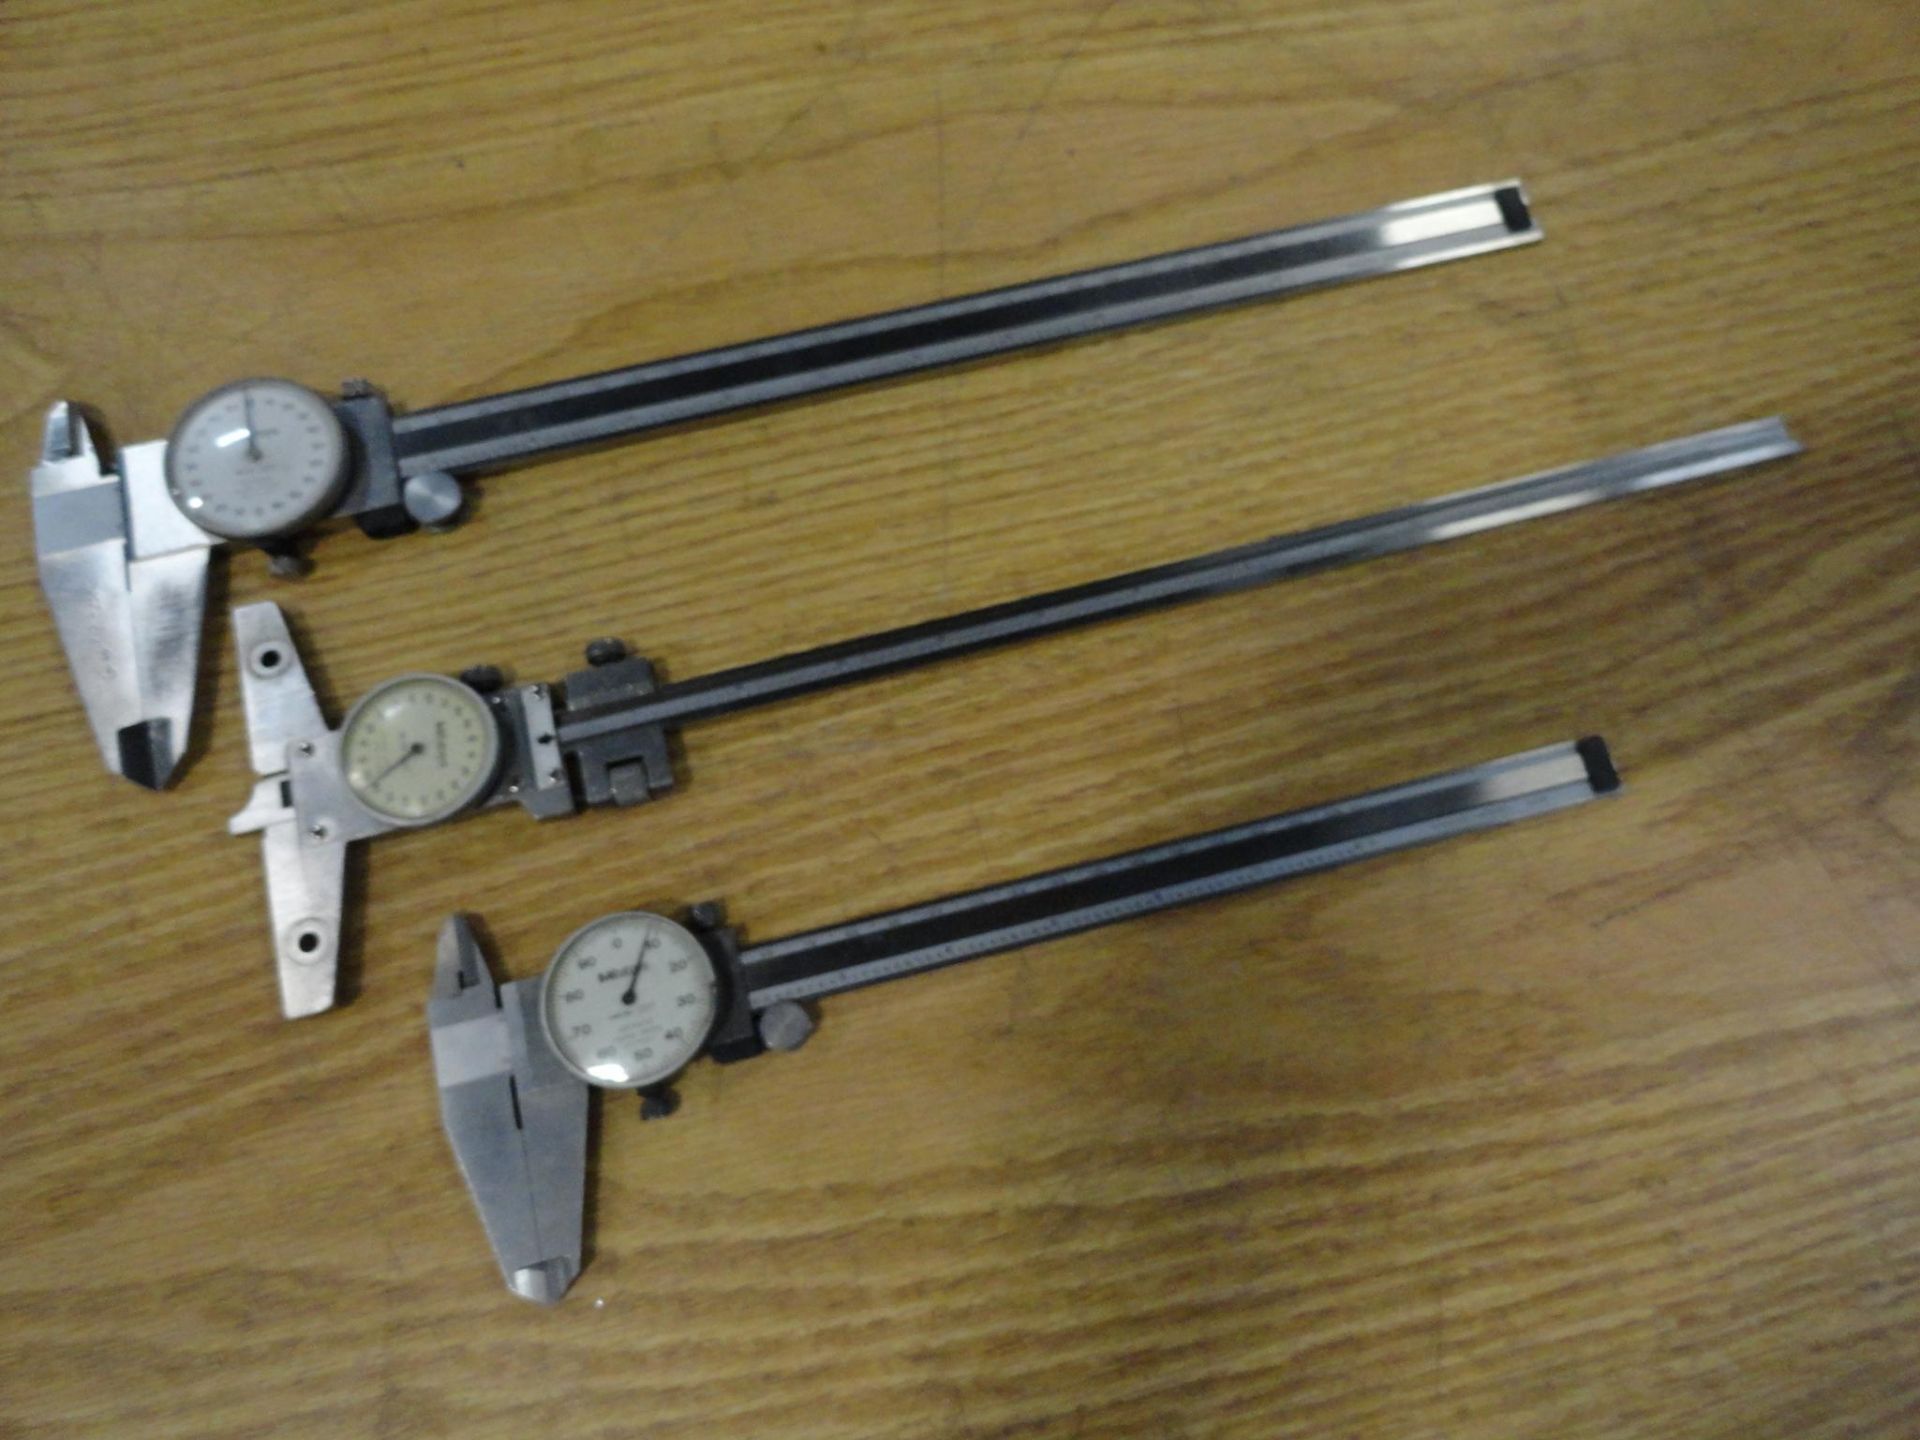 (3) Mitutoyo dial calipers, 8 and 12 inch, .001 inch increments